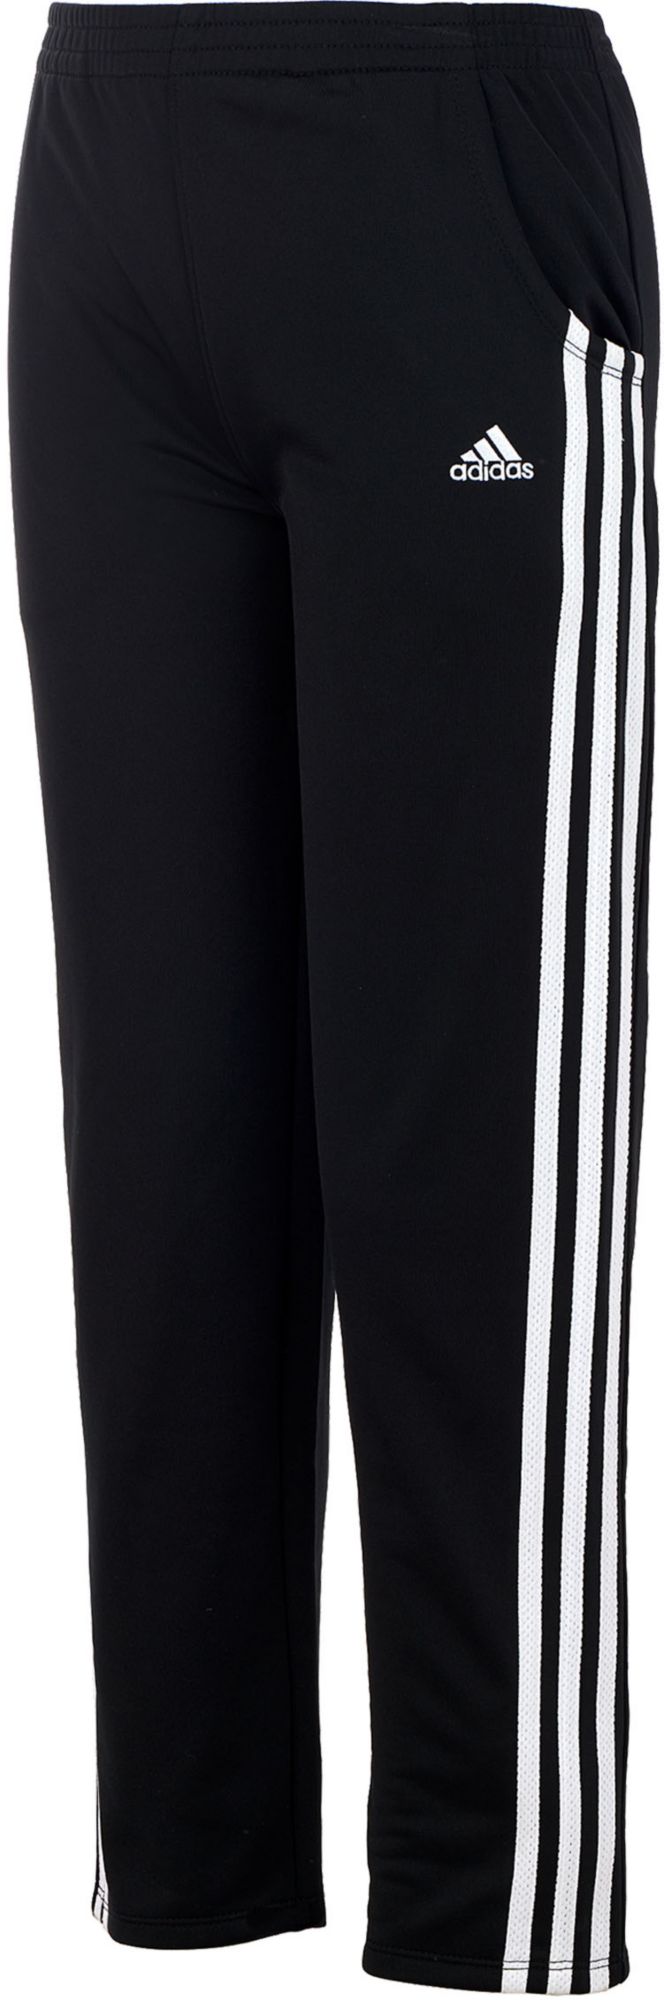 adidas track pants for girls